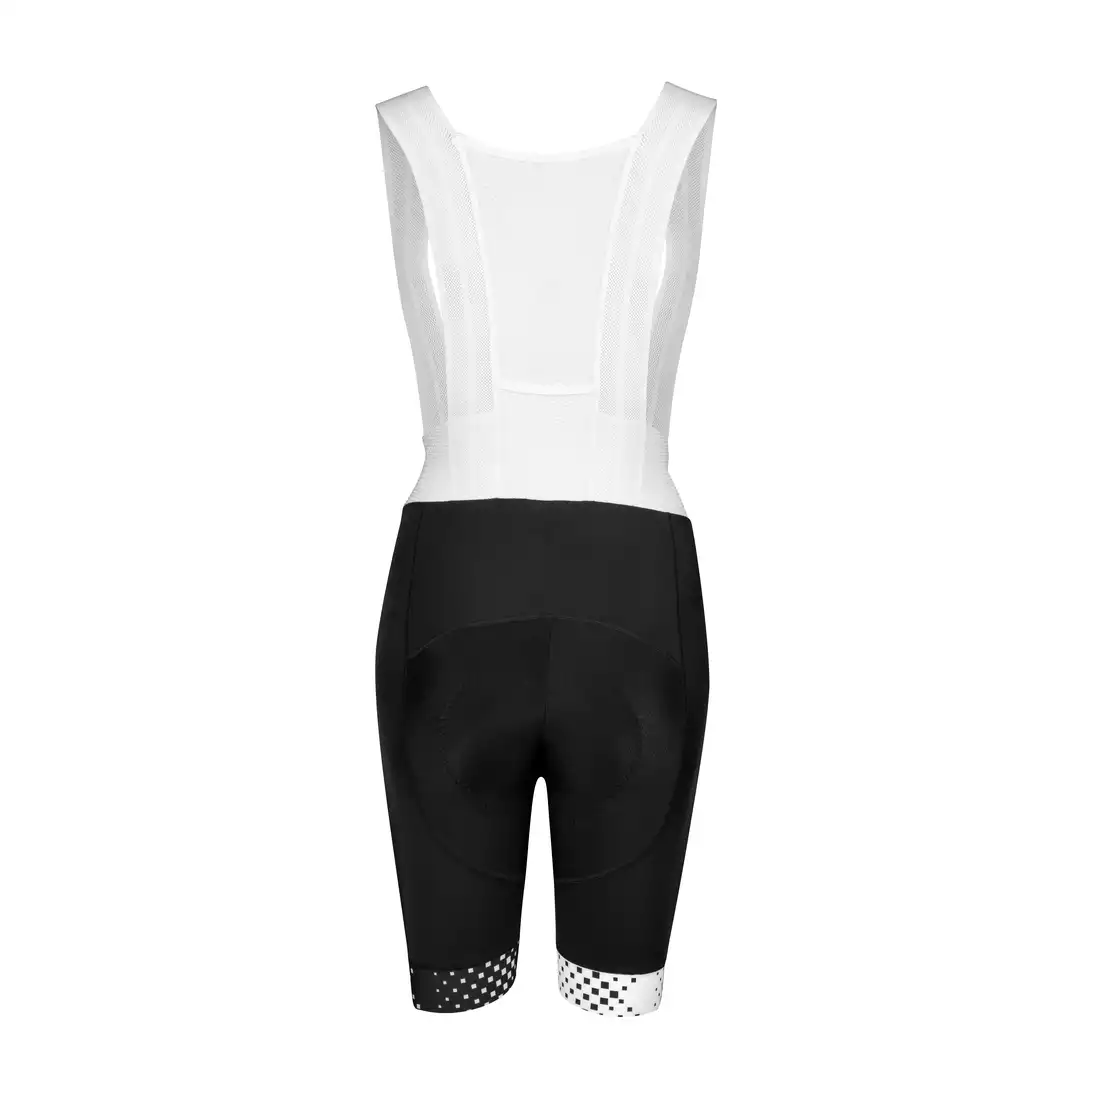 FORCE VISION LADY Women's cycling shorts with braces, black and white